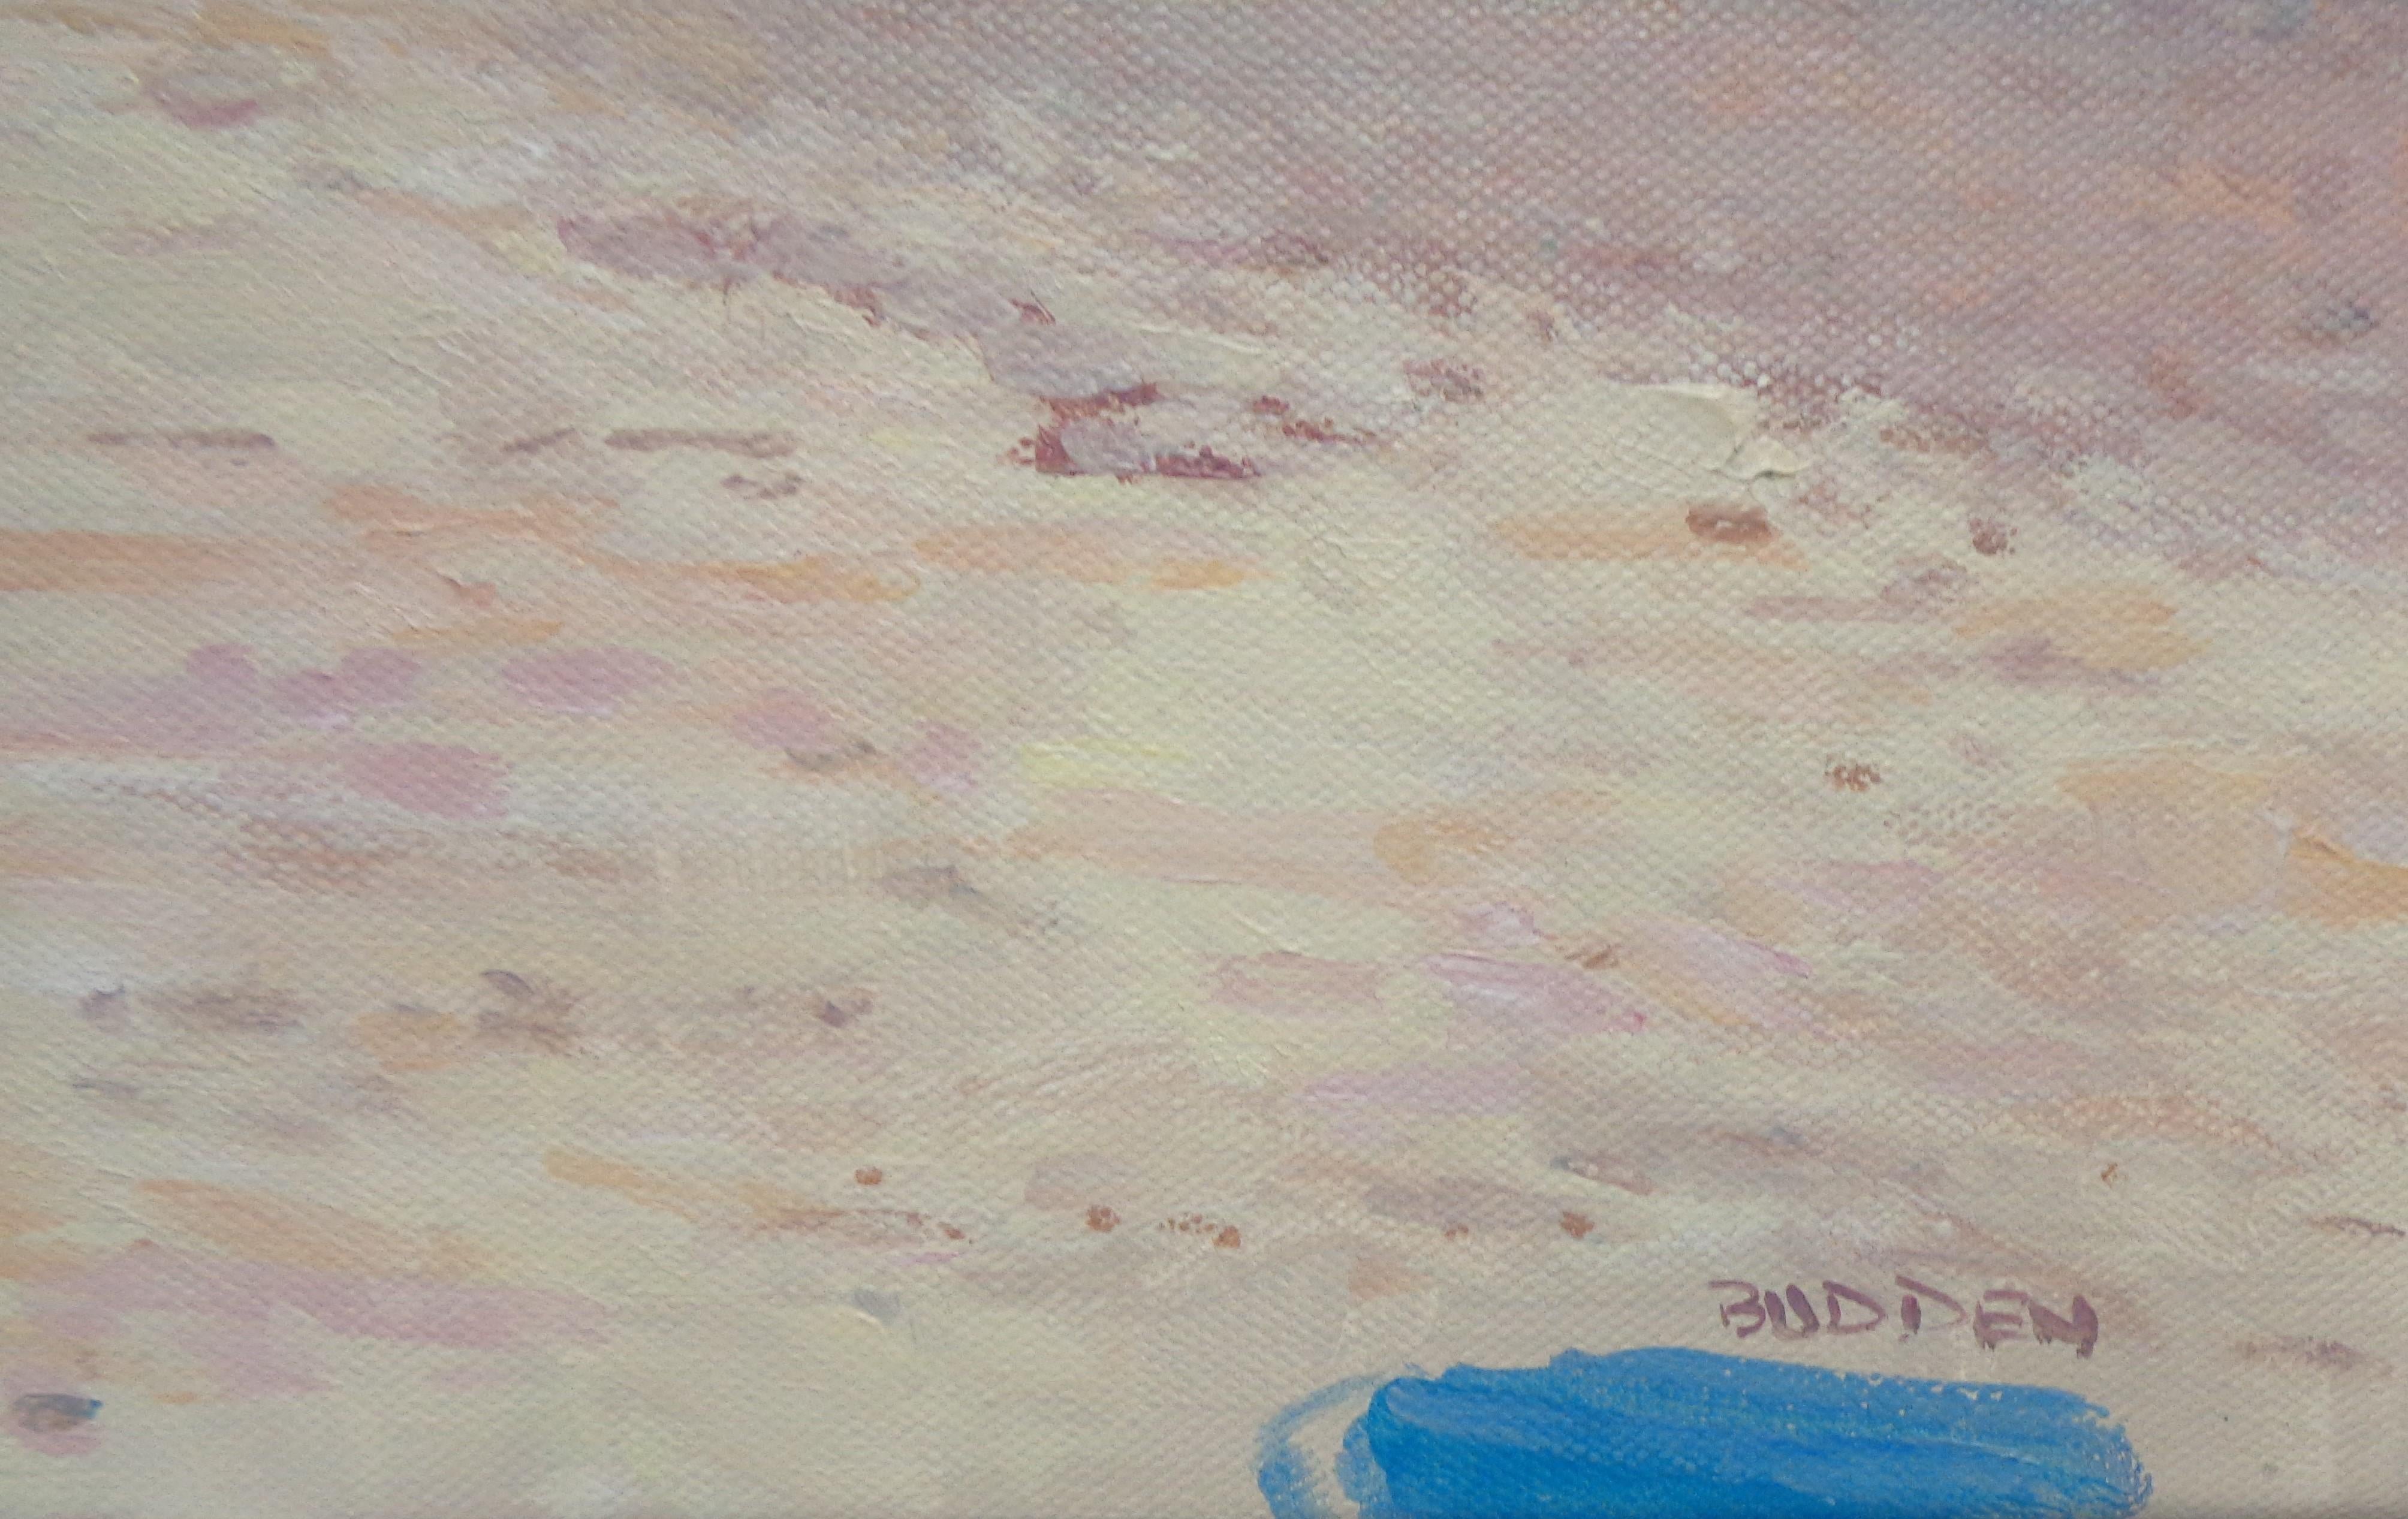 Beach Ocean Impressionistic Seascape Oil Painting Michael Budden Beach Day For Sale 5